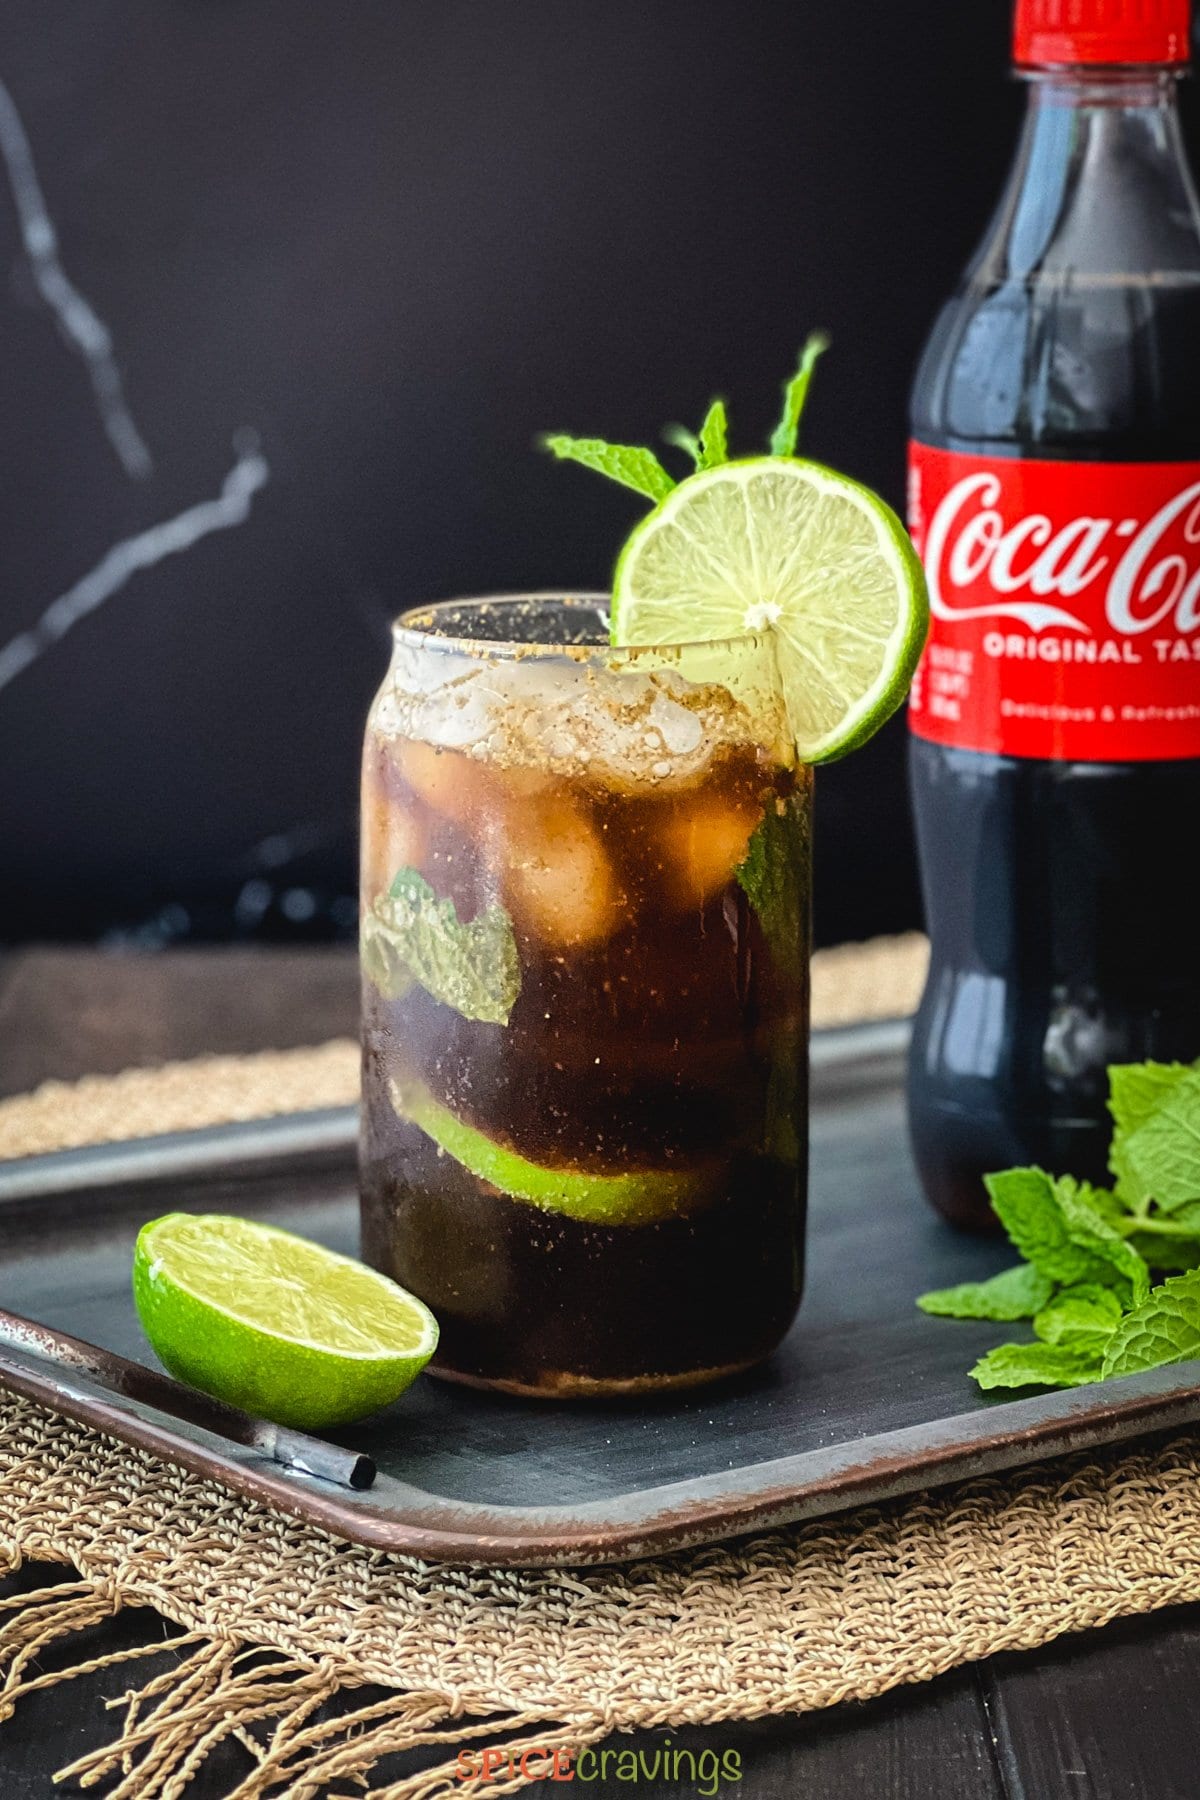 Glass of coke with lime slice next to a bottle of coca-cola